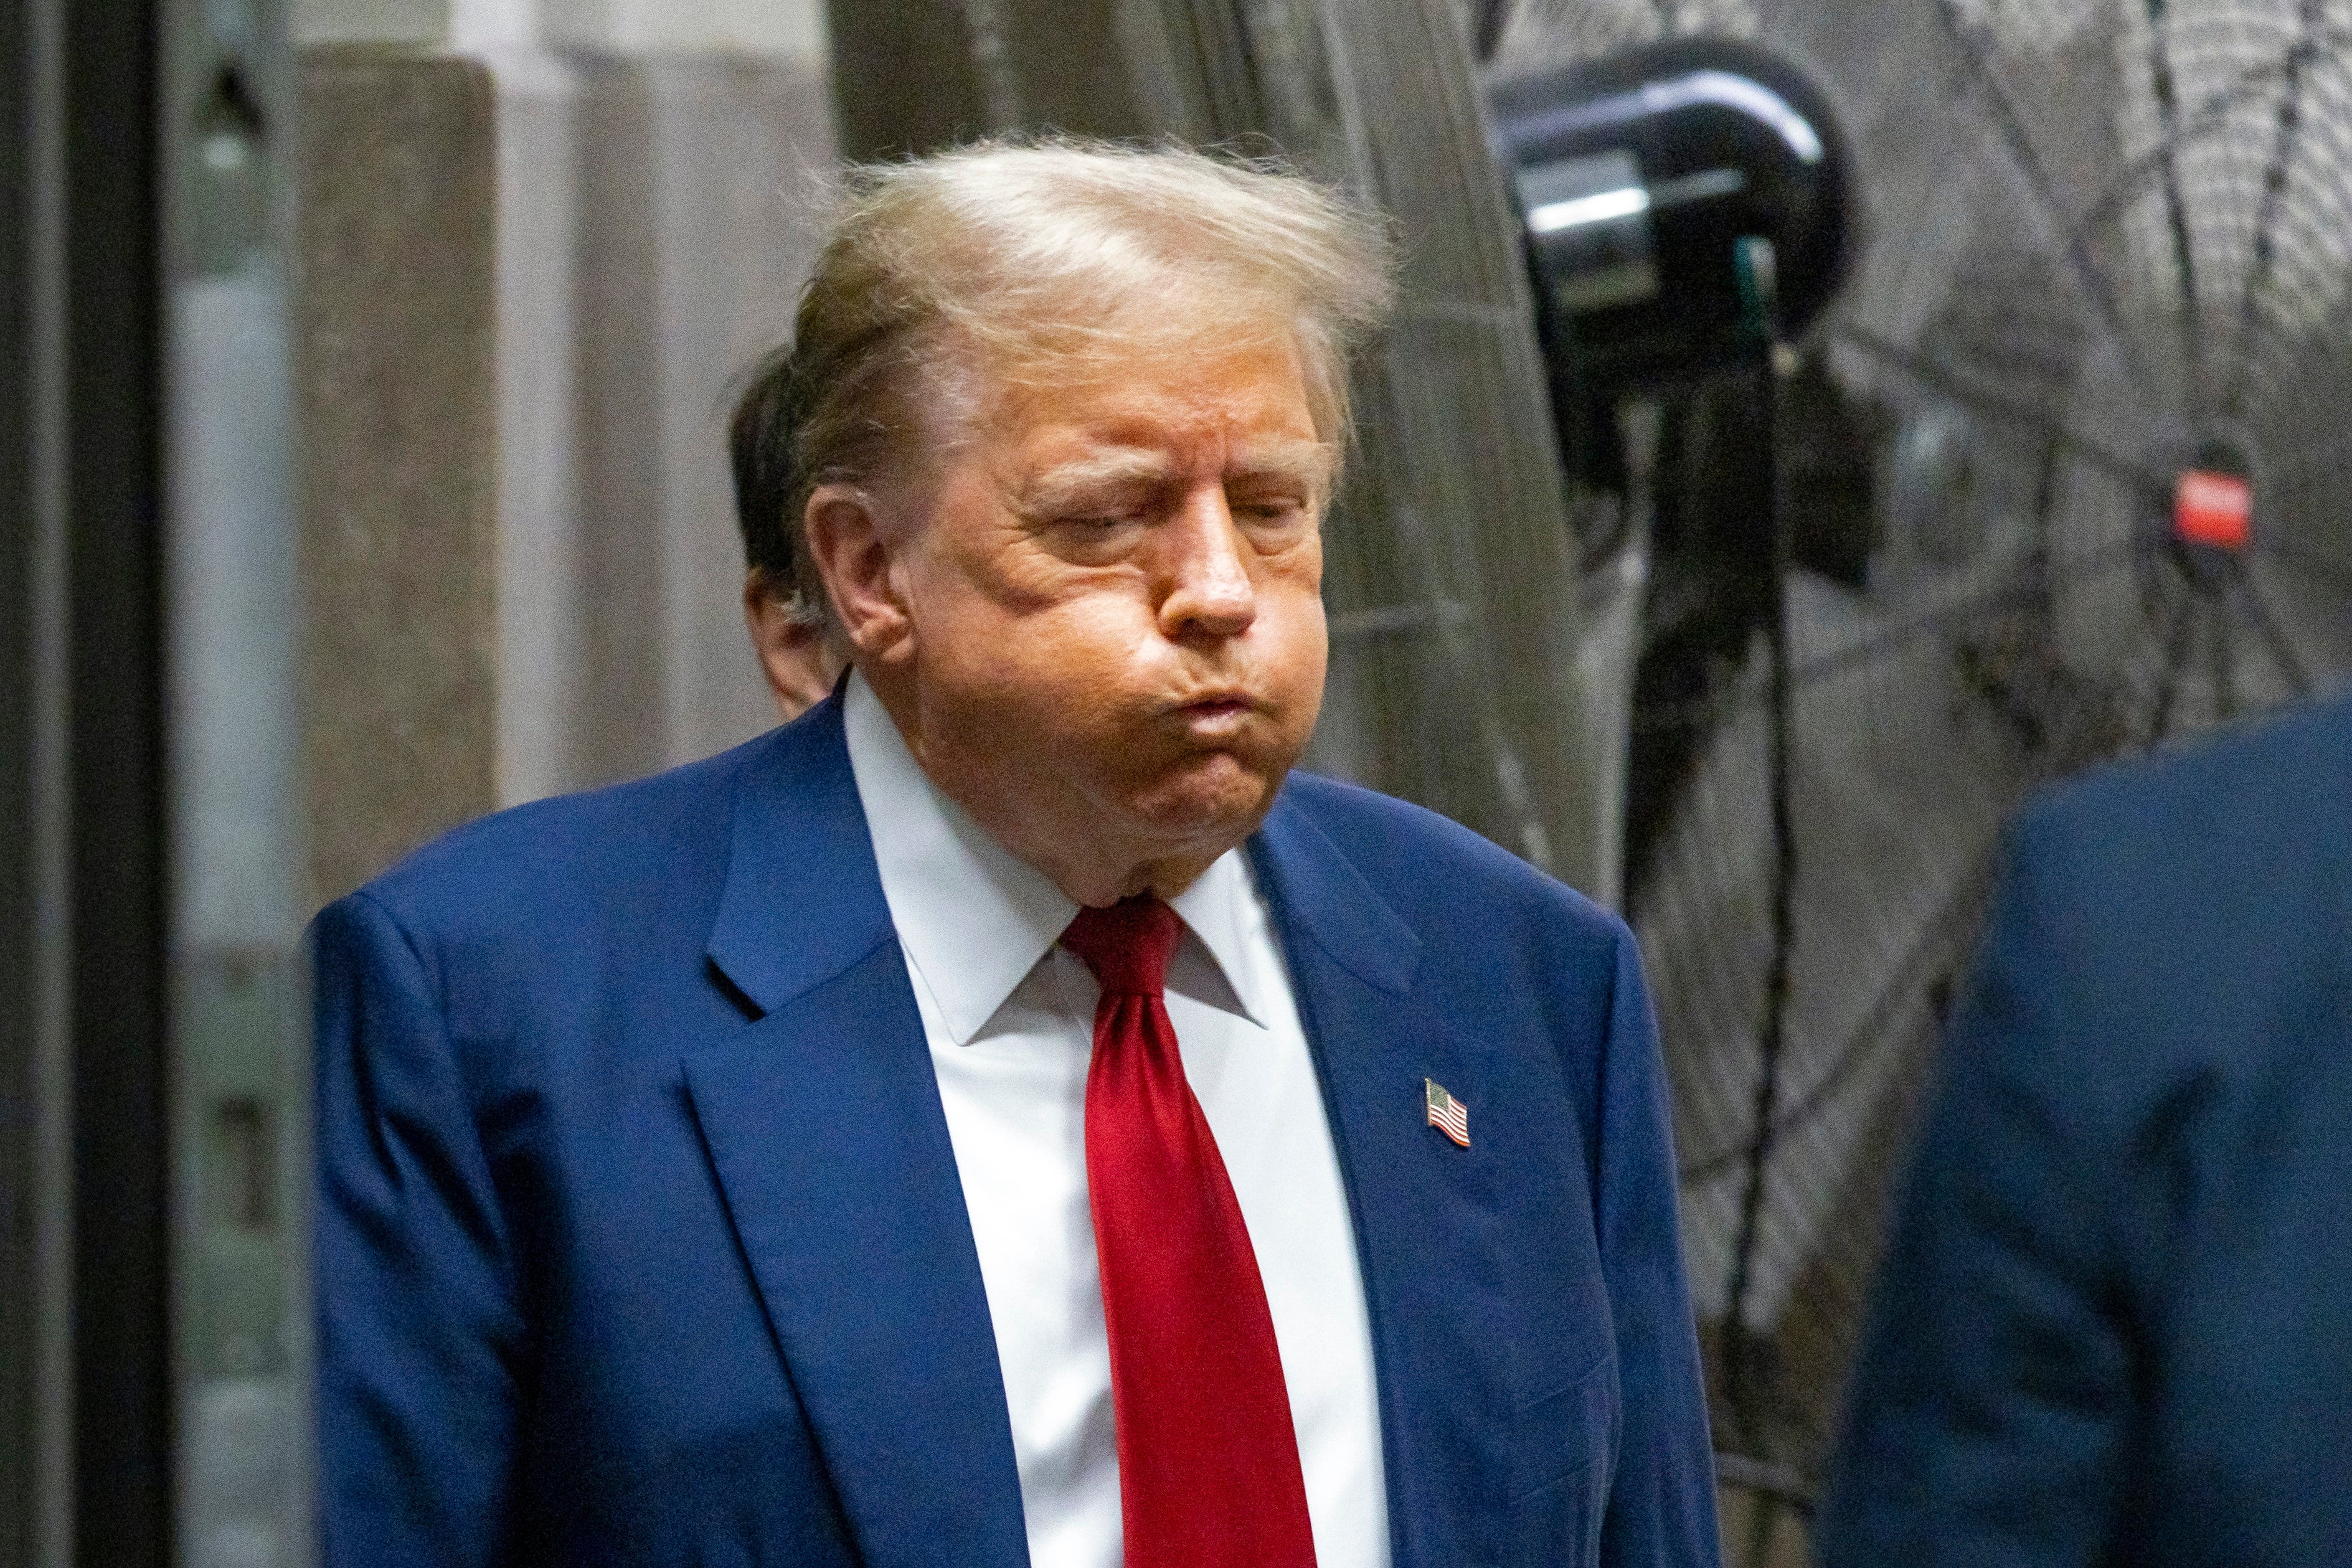 Donald Trump leaving the courtroom at his trial on 30 April